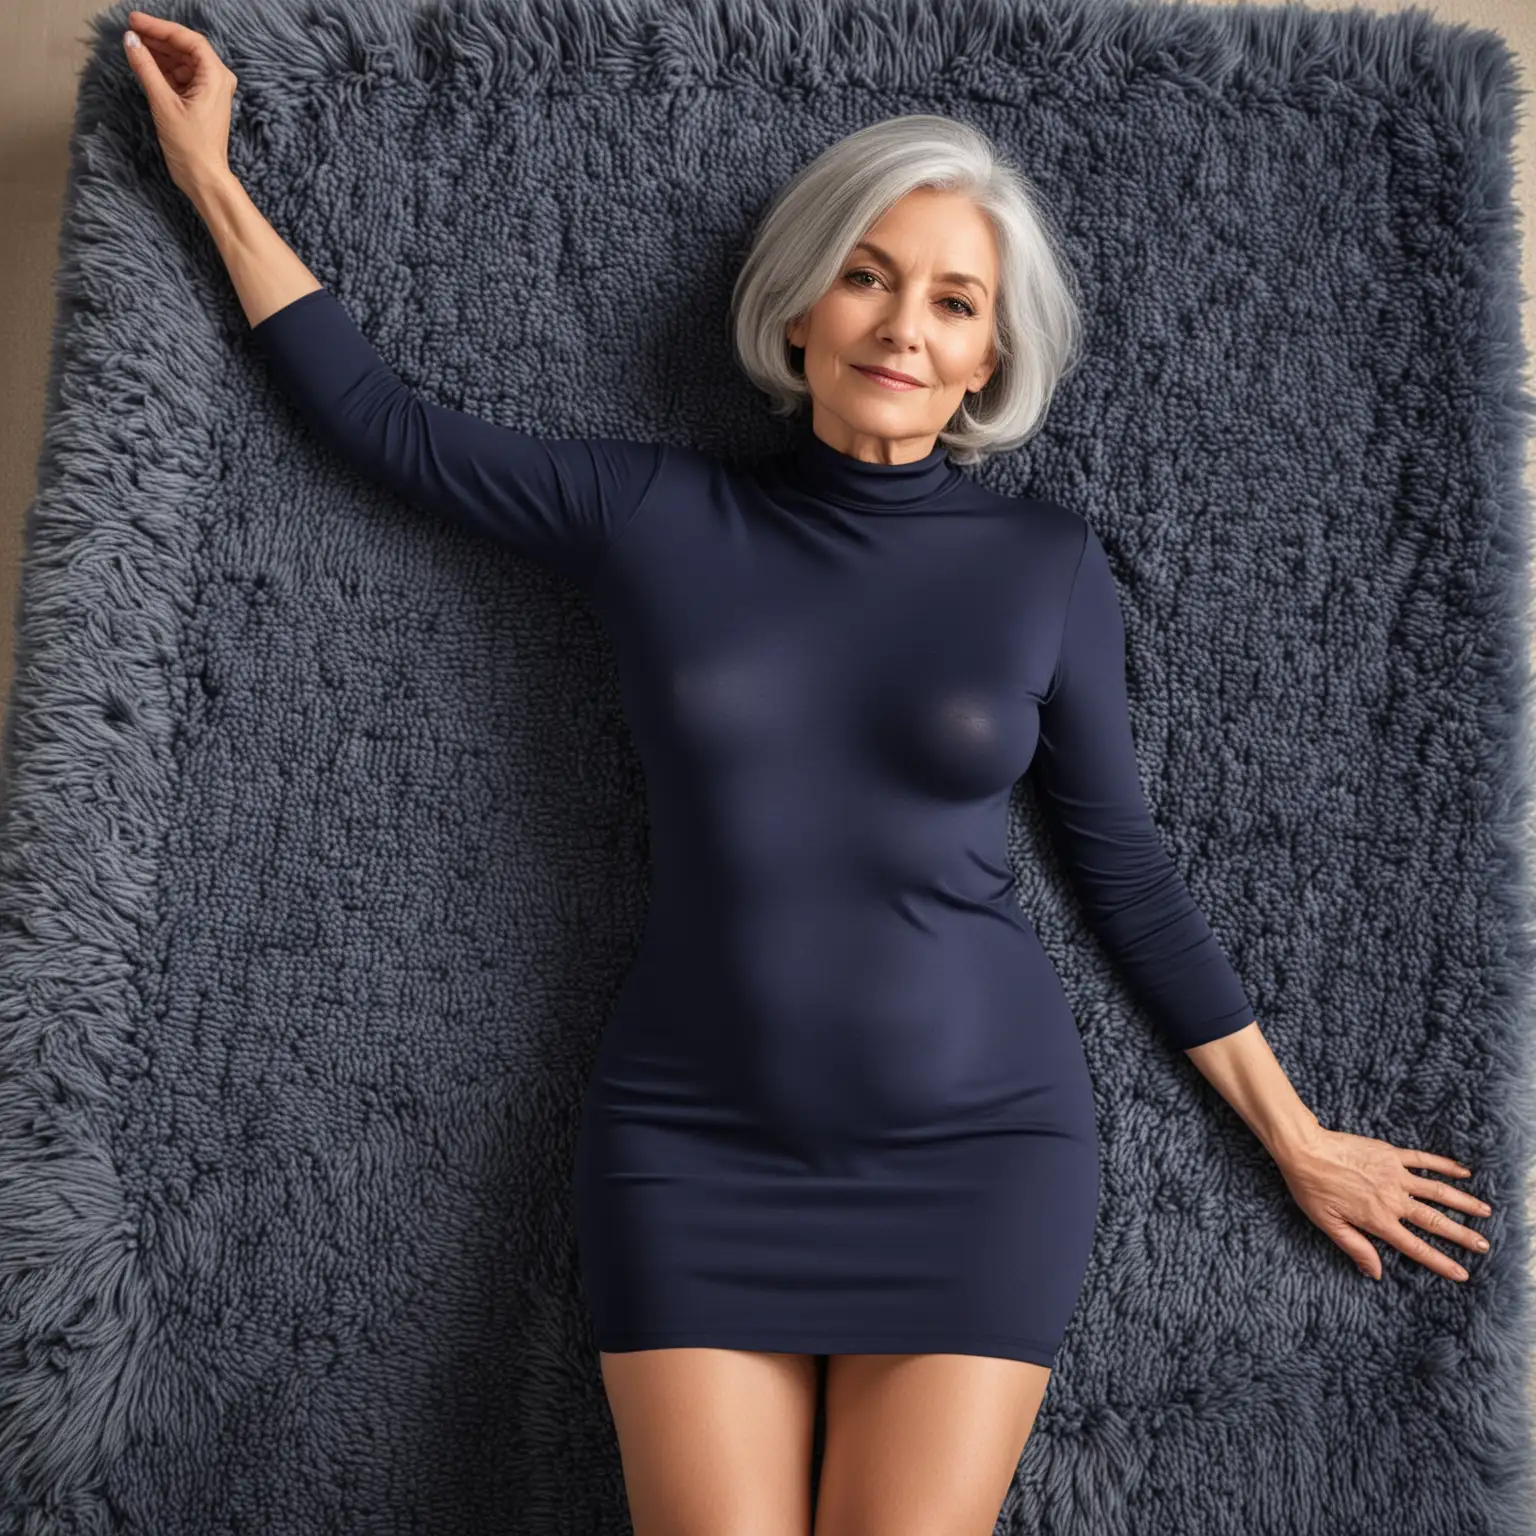 Elegant Mature Woman Relaxing in Navy Blue Mini Dress on Fluffy Rug